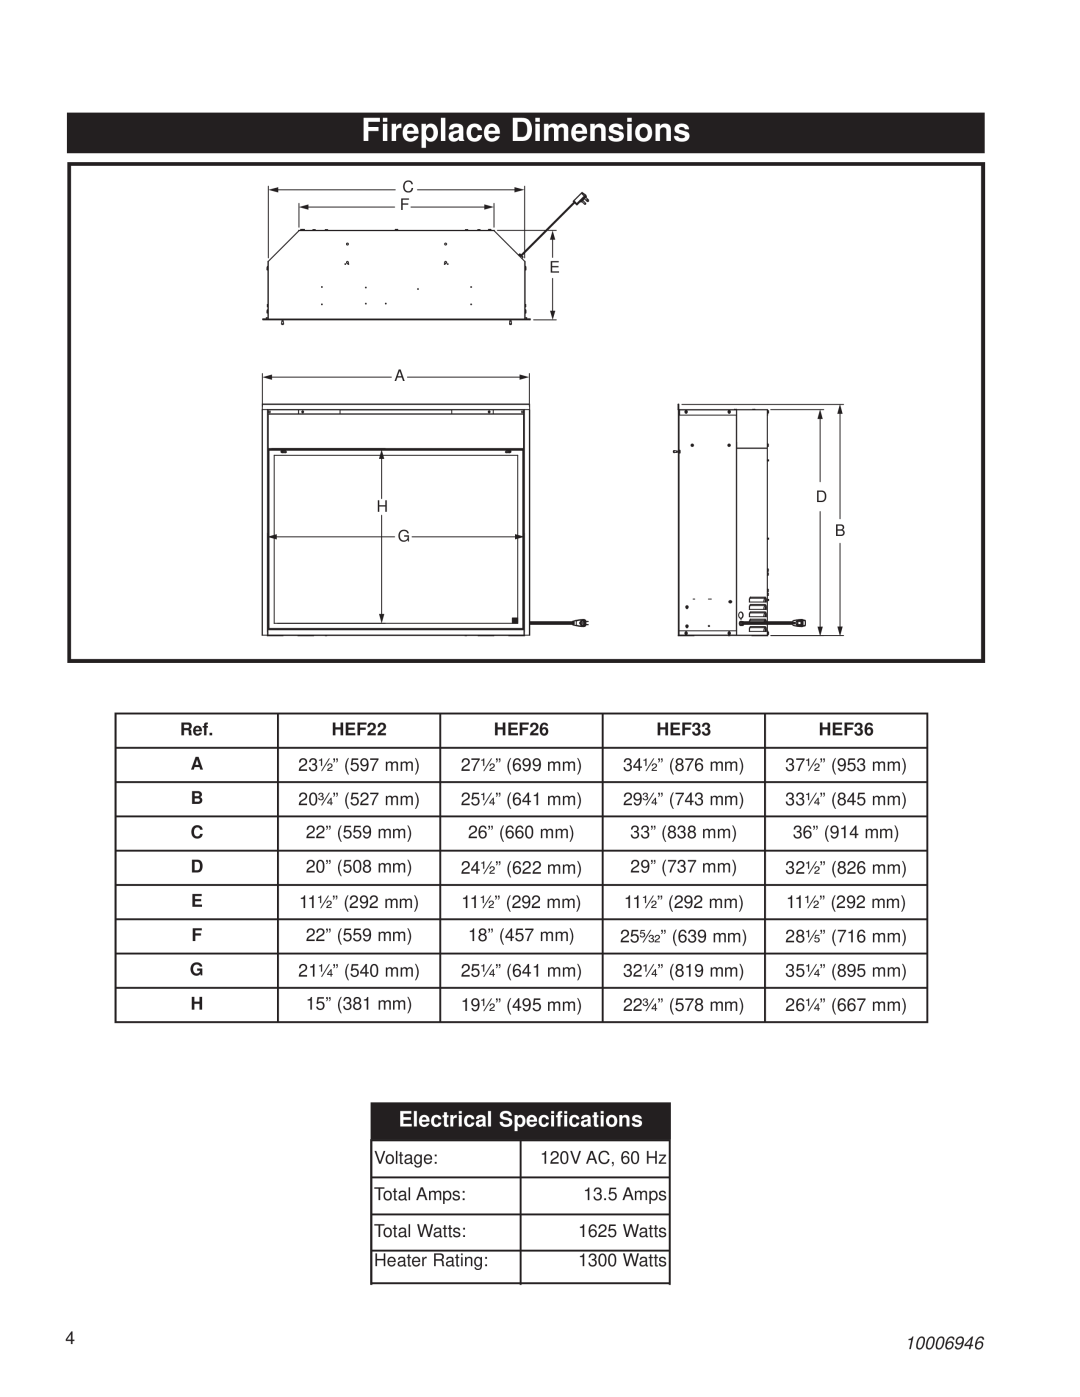 Vermont Casting HEF33 Fireplace Dimensions, Electrical Specifications, HEF22, HEF26, HEF36, 10006946 